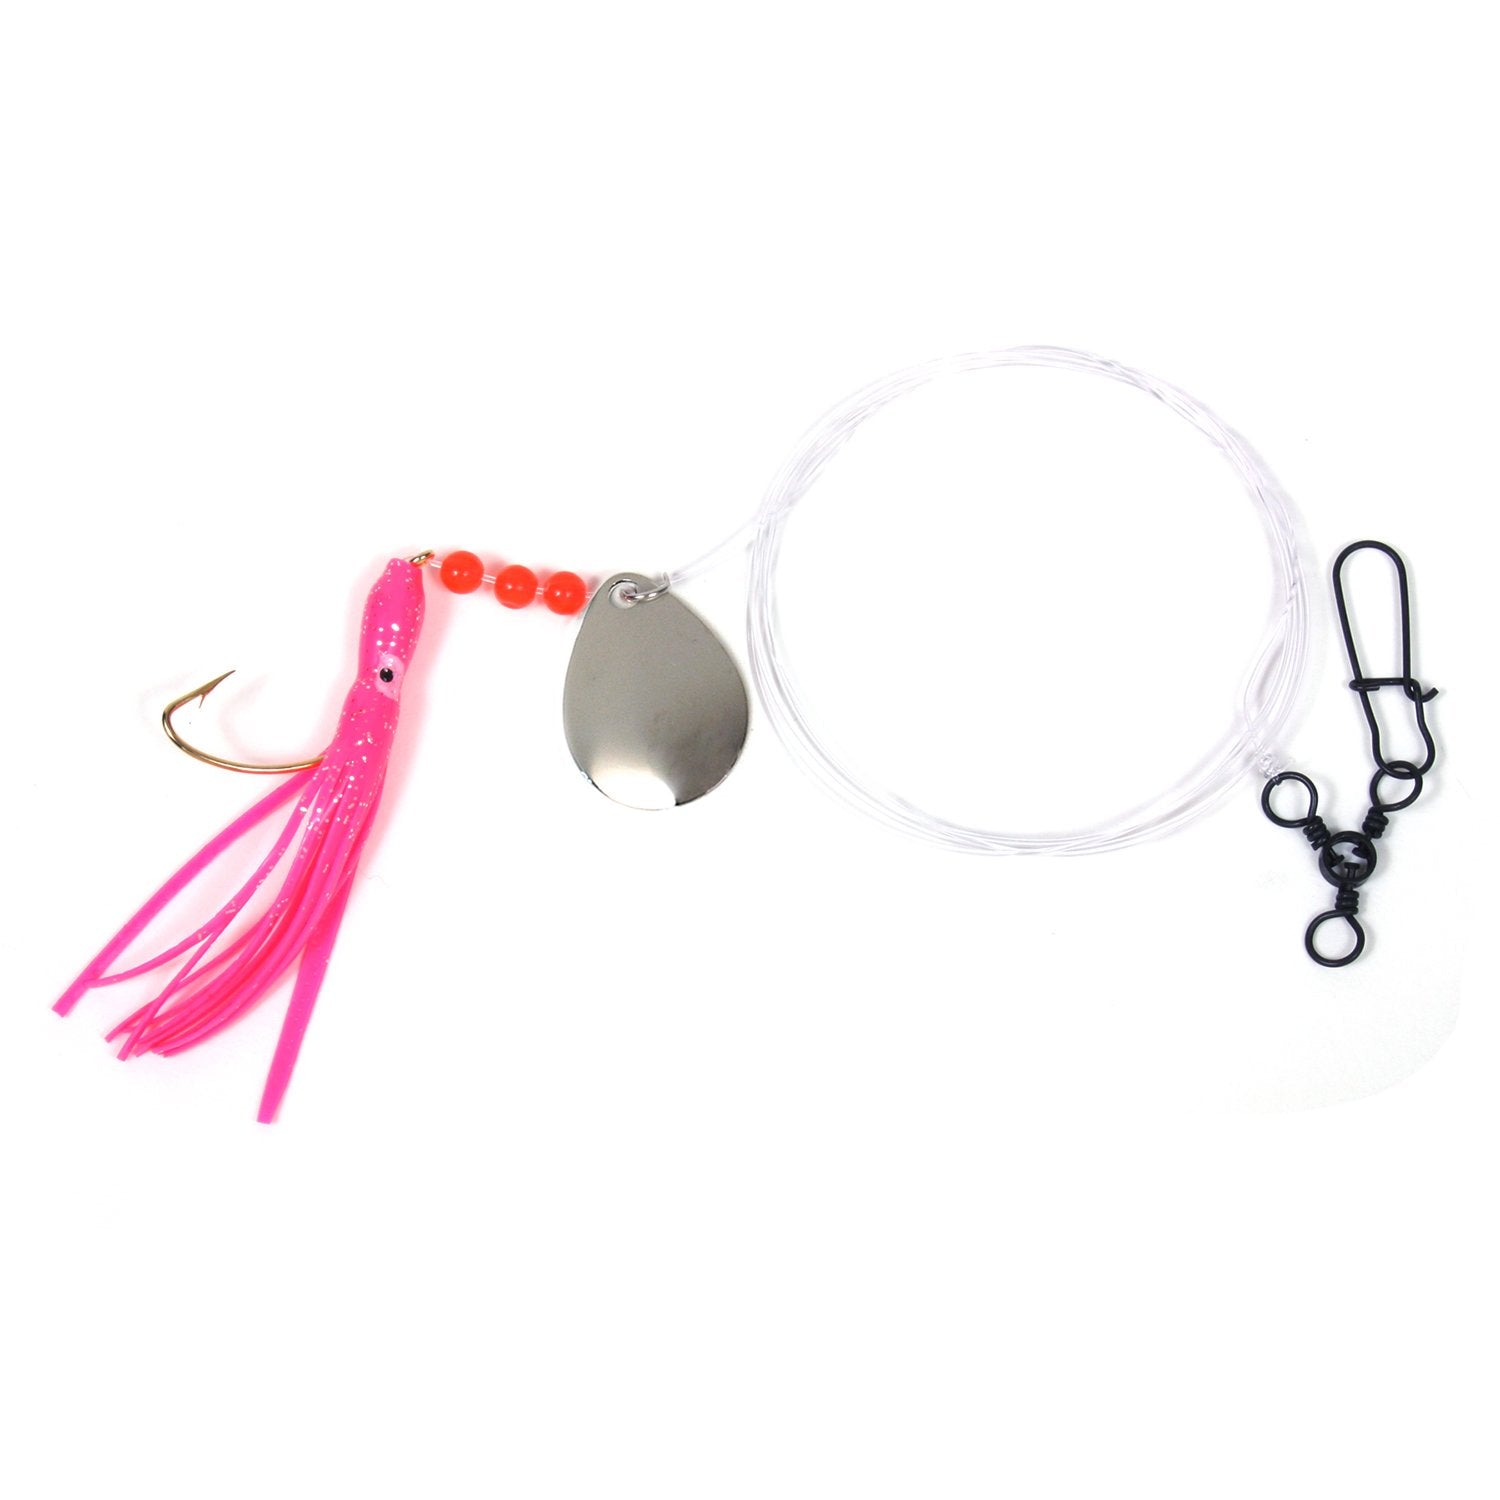 Fishing Squid Rigs Making Kit 161pcs Fluke Flounder Saltwater Fishing  Hoochie Rig, Include Soft Squid Skirt Lure, 3 Way Swivel with Duo Lock  Snap